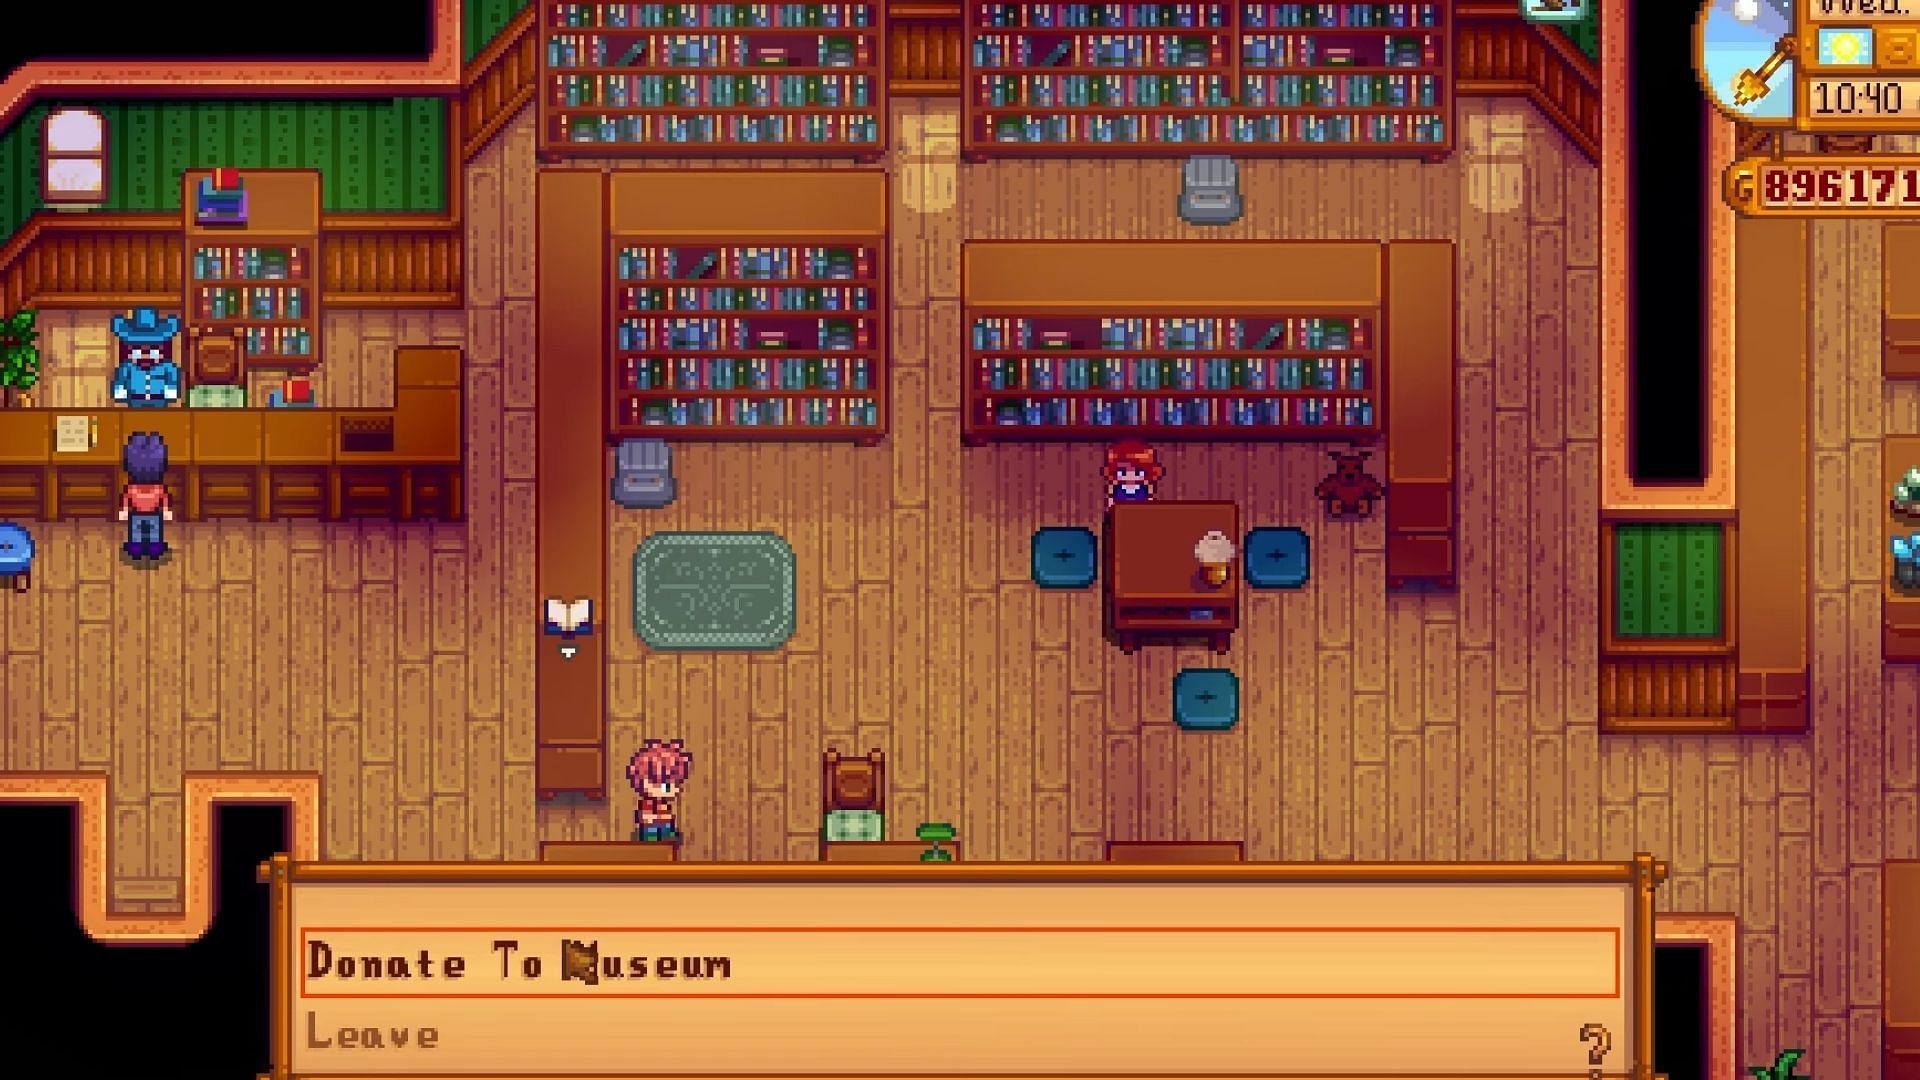 Gunther rewards players with these seeds after donating 15 artifacts to the museum (Image via ConcernedApe || YouTube/@Ubisen Games)